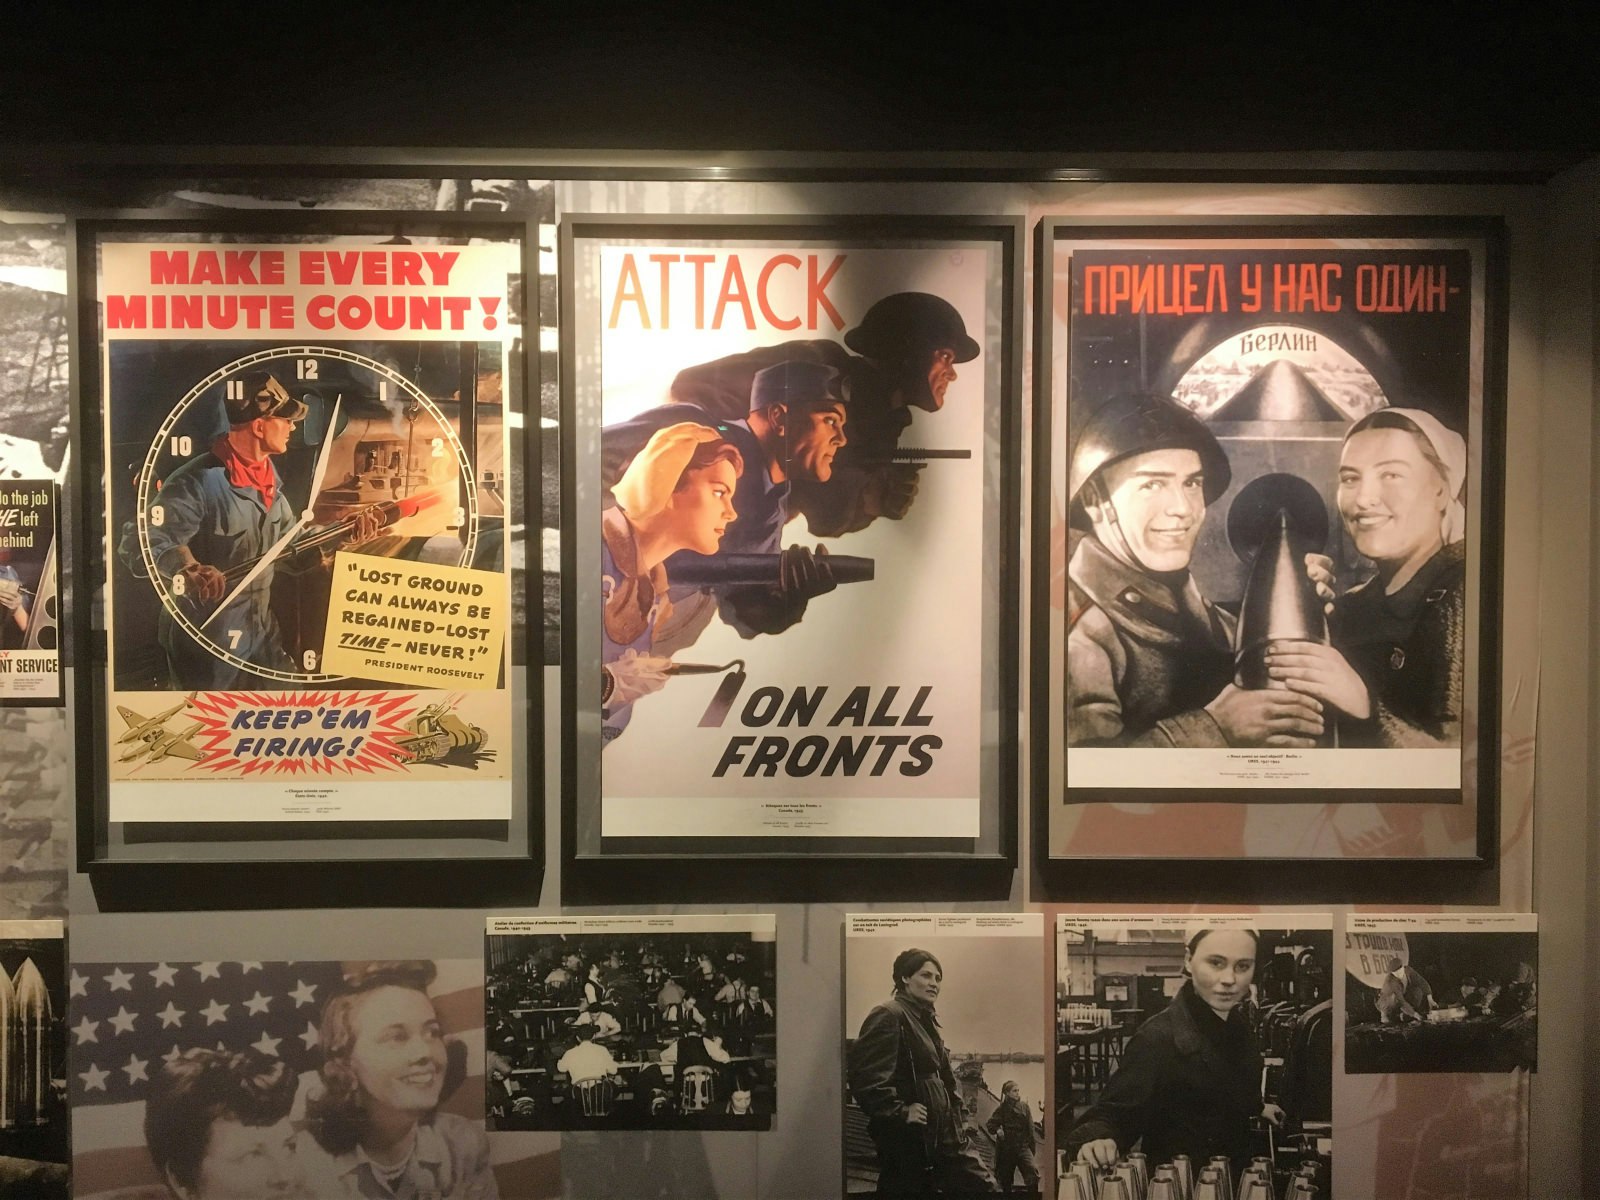 Old WWII posters show colorful, art deco visions of soldiers and manufacturers, inside the Le Mémorial de Caen, France 